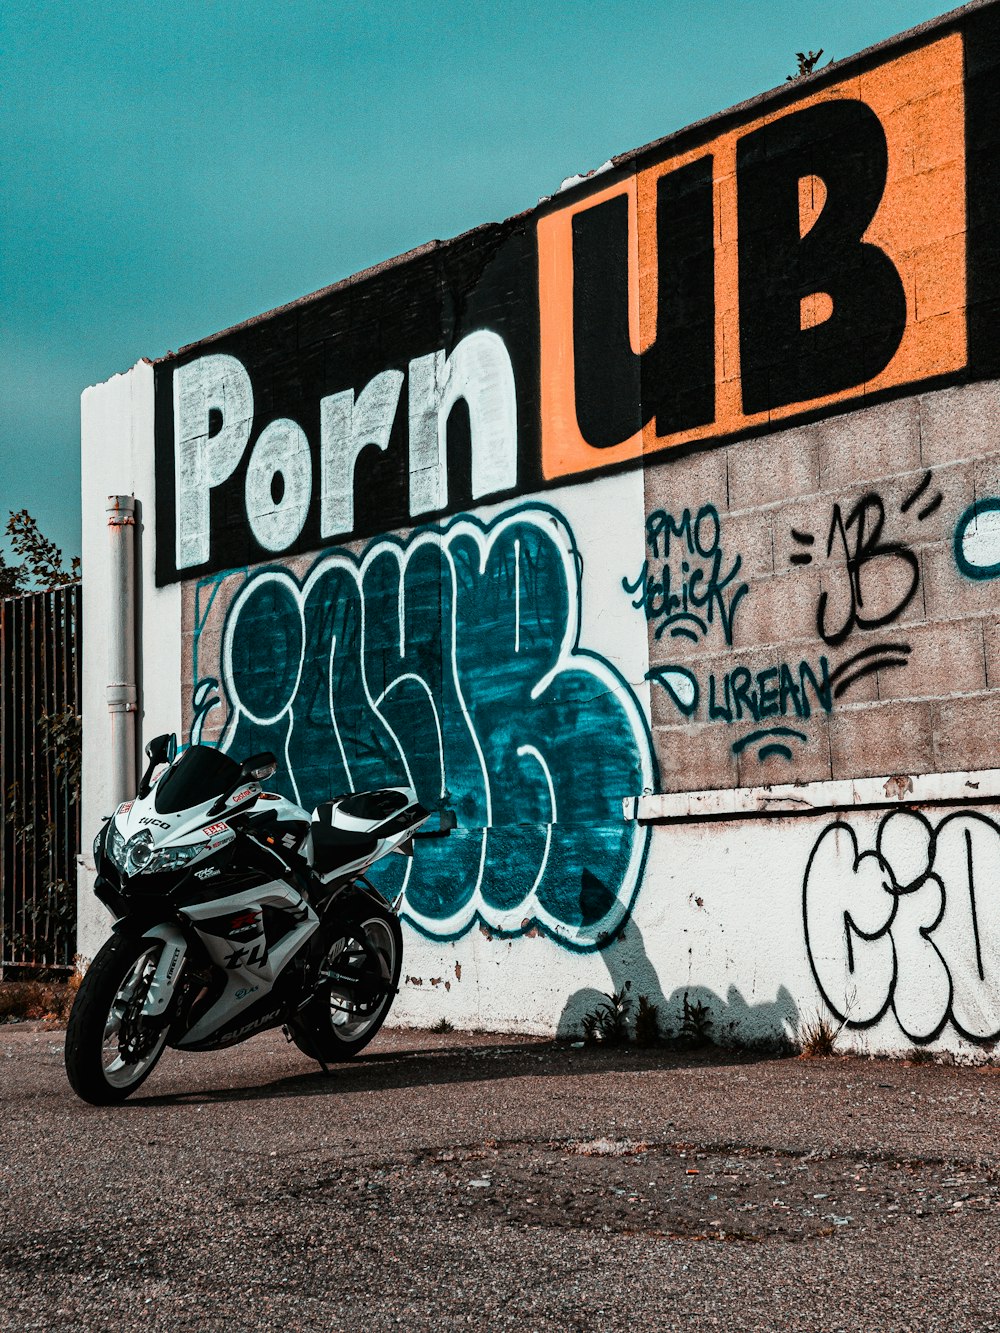 black motorcycle parked beside wall with graffiti